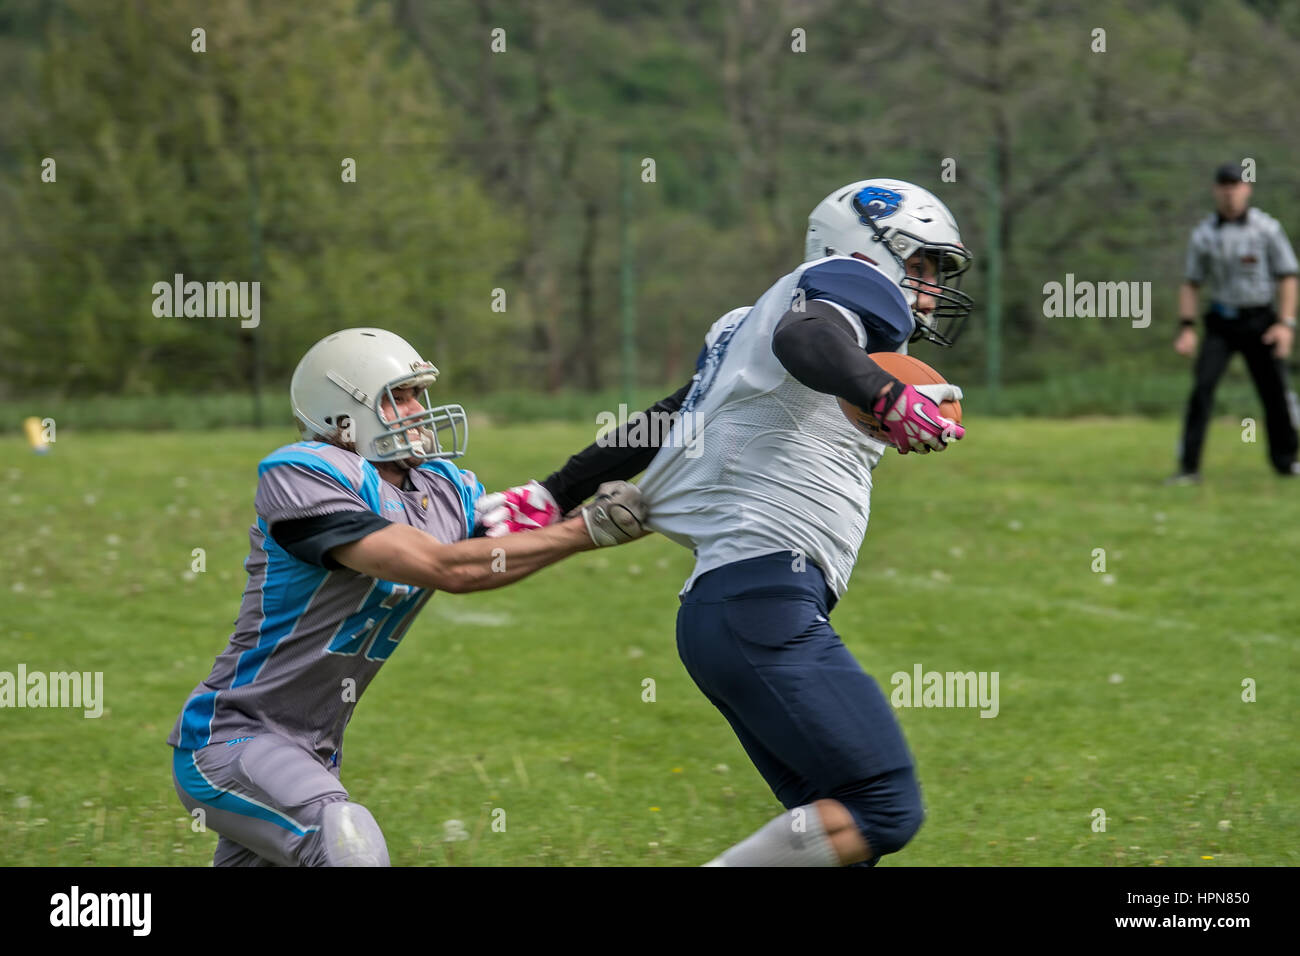 Bor, Serbia - April 17, 2016: Rugby practice match Stock Photo